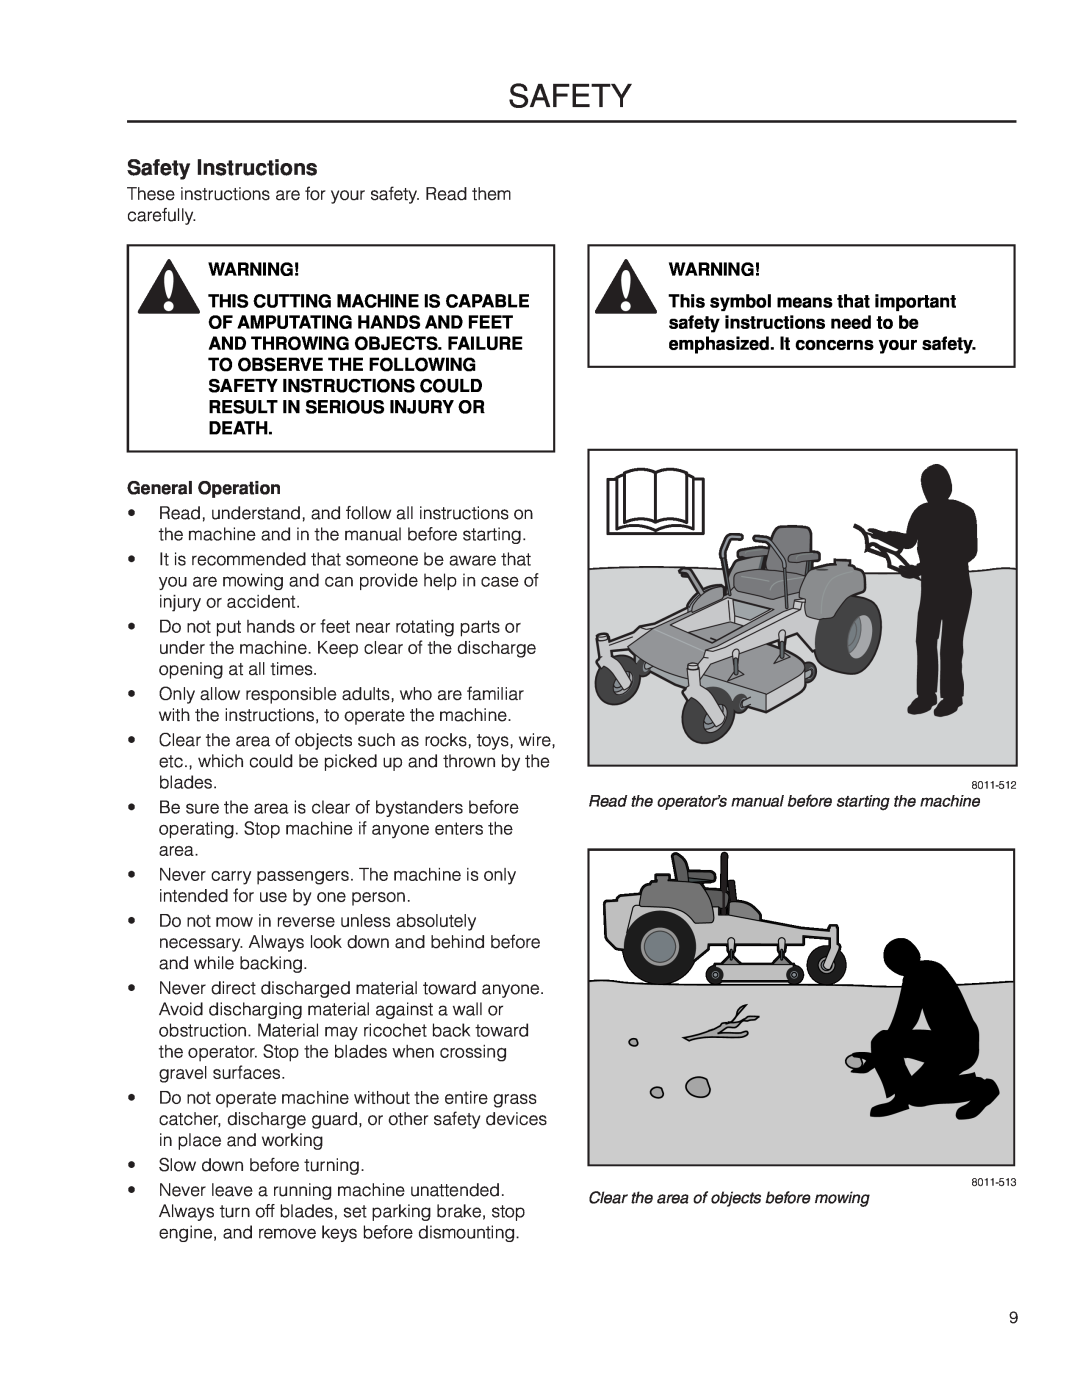 Husqvarna 966809001, 966582201 Safety Instructions, This Cutting Machine Is Capable Of Amputating Hands And Feet 